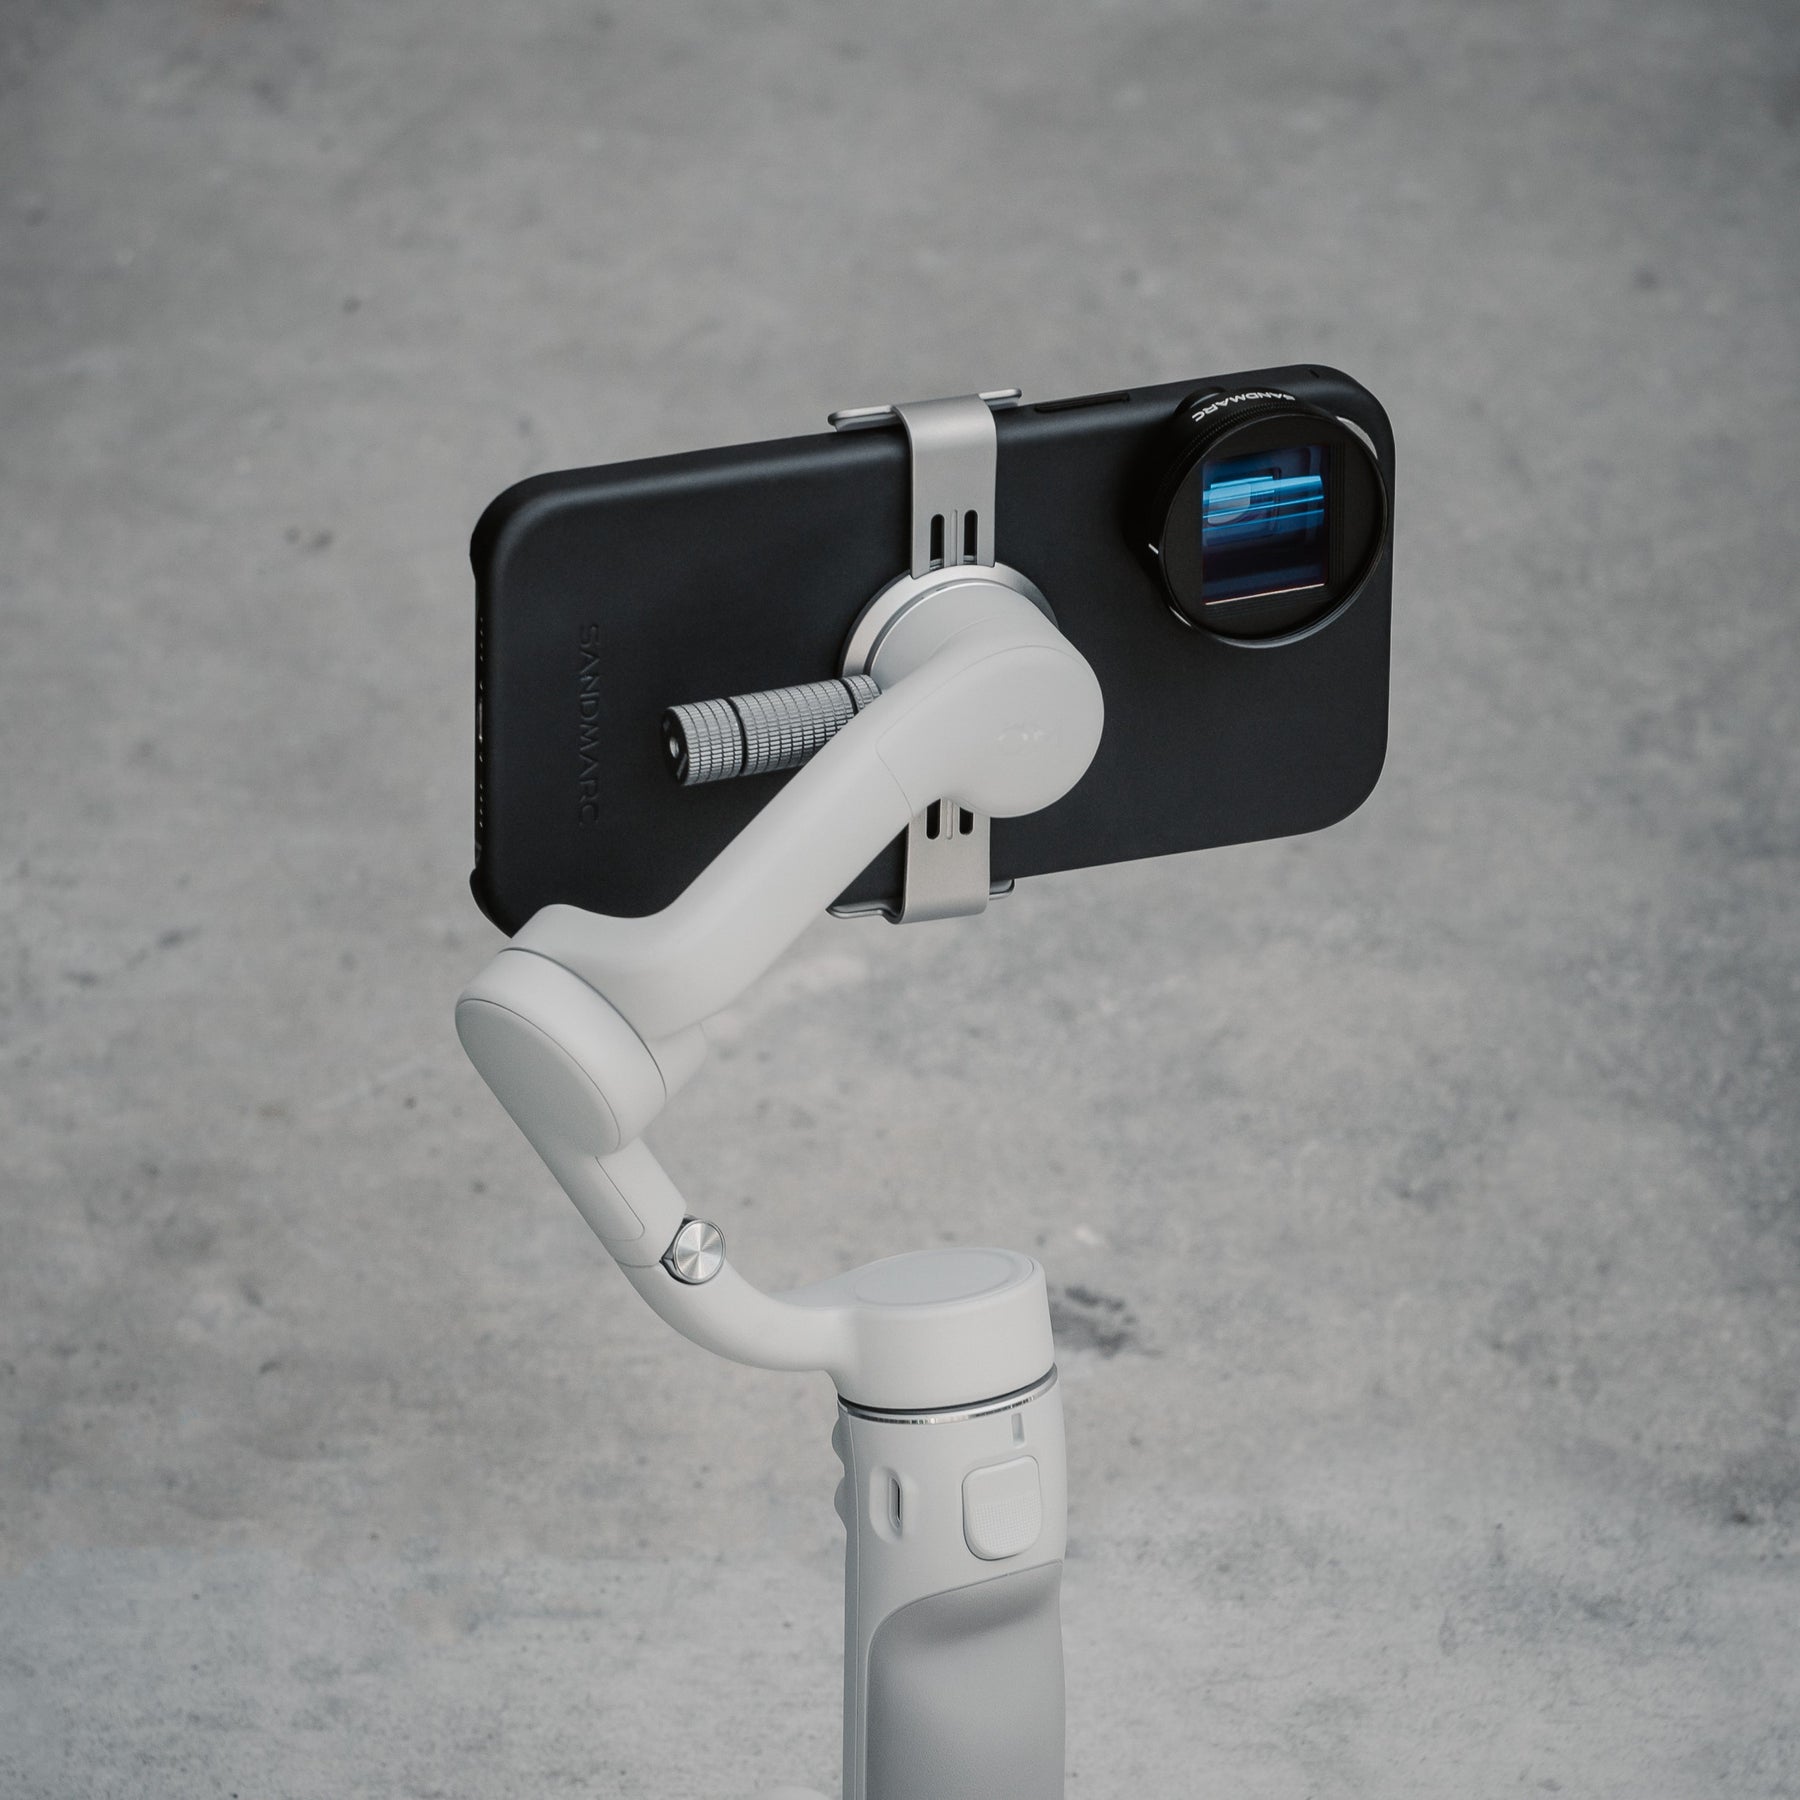 DJI's Osmo Mobile 6 smartphone gimbal aims to get you filming